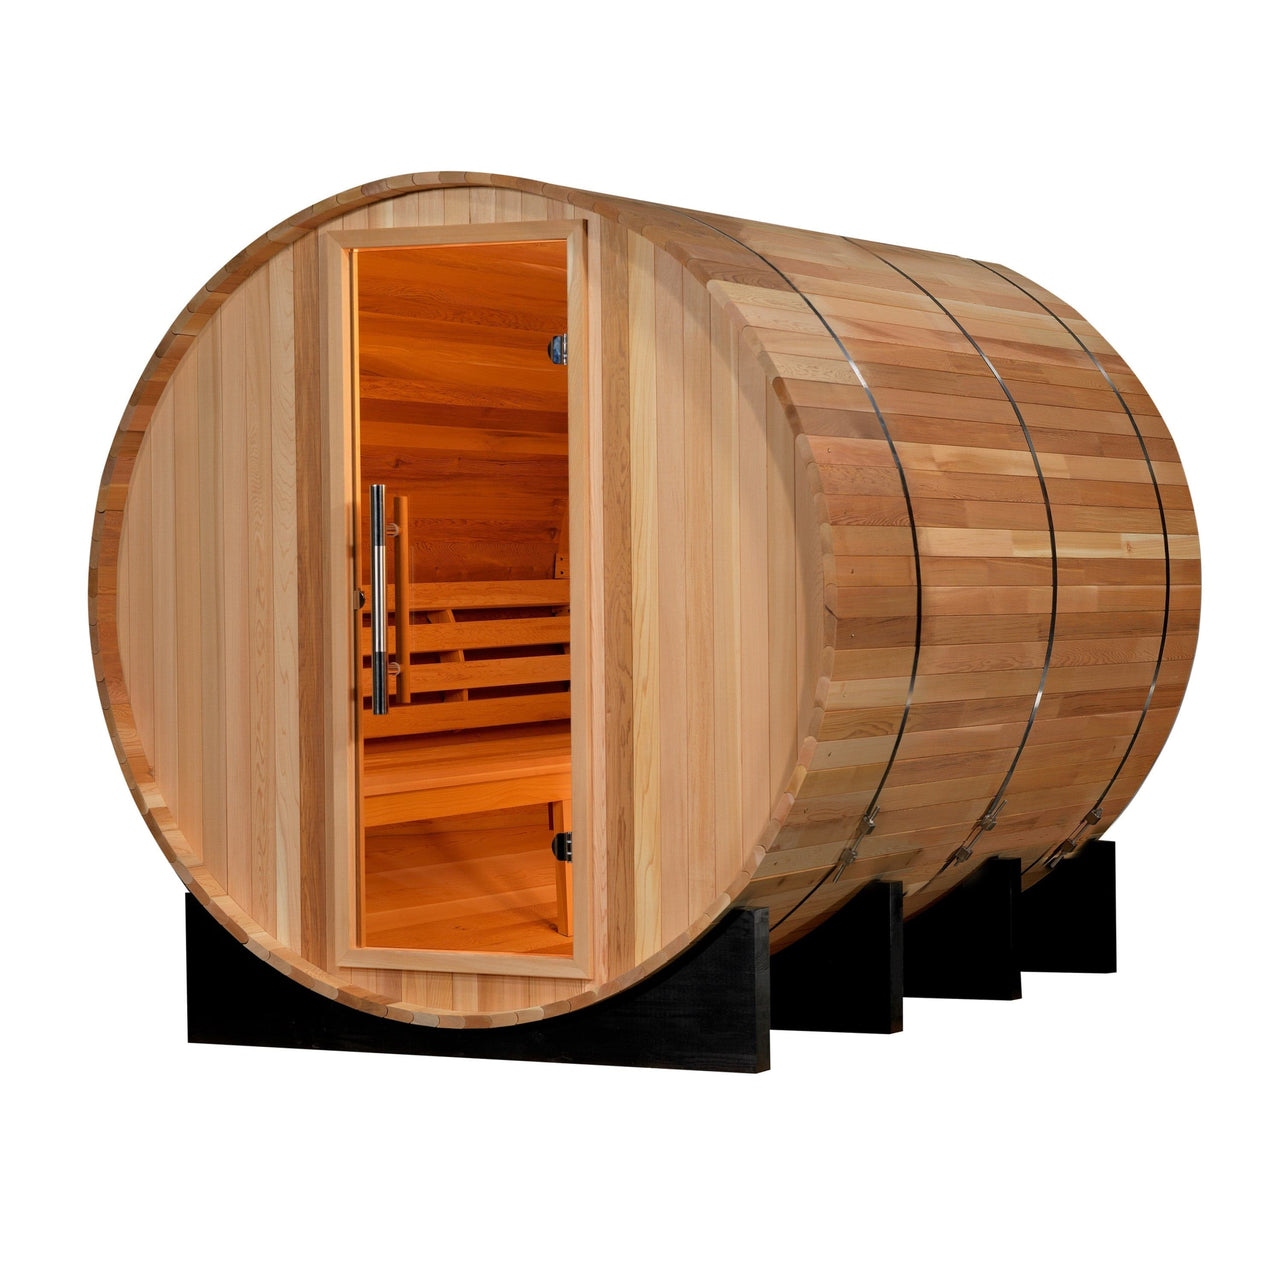 GOLDEN DESIGNS "Marstrand" 6 Person Barrel Traditional Steam Sauna - Canadian Red Cedar - 2022 Model - LUXUSFIT Luxury Exercise & Recovery Equipment